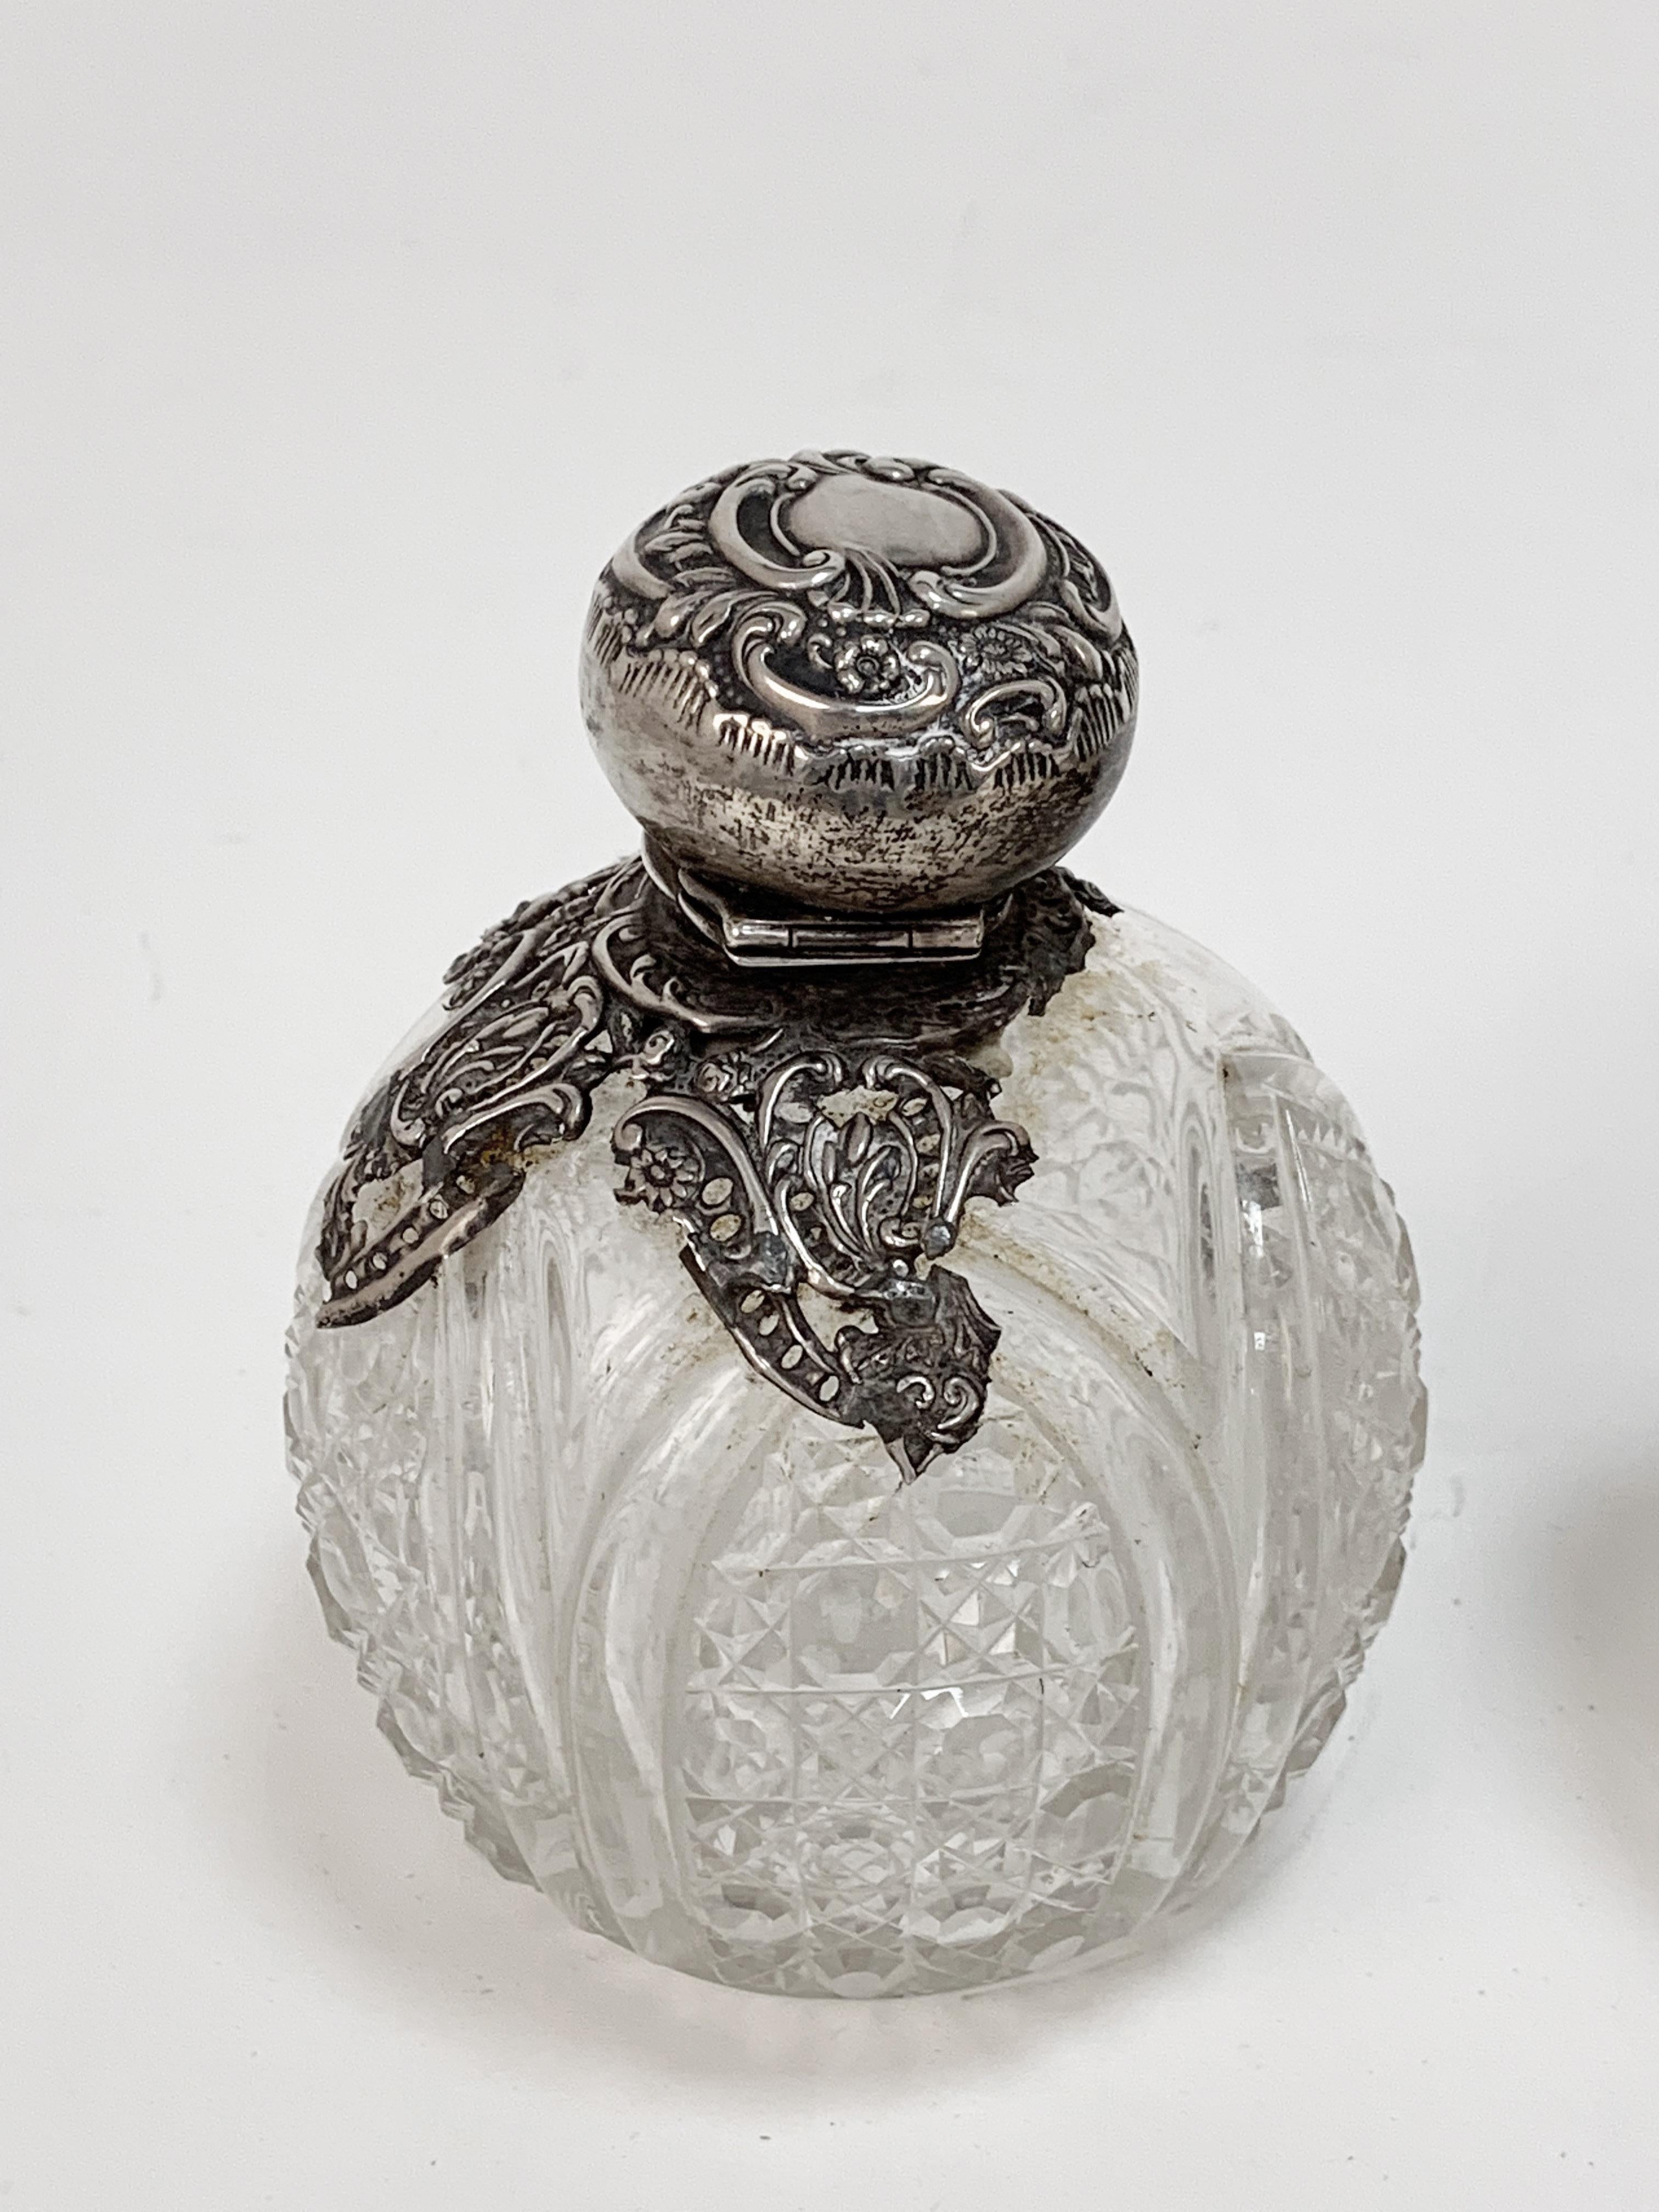 English Pair of Antique Perfume Bottles, Sterling Silver and Crystal, England Early 1900